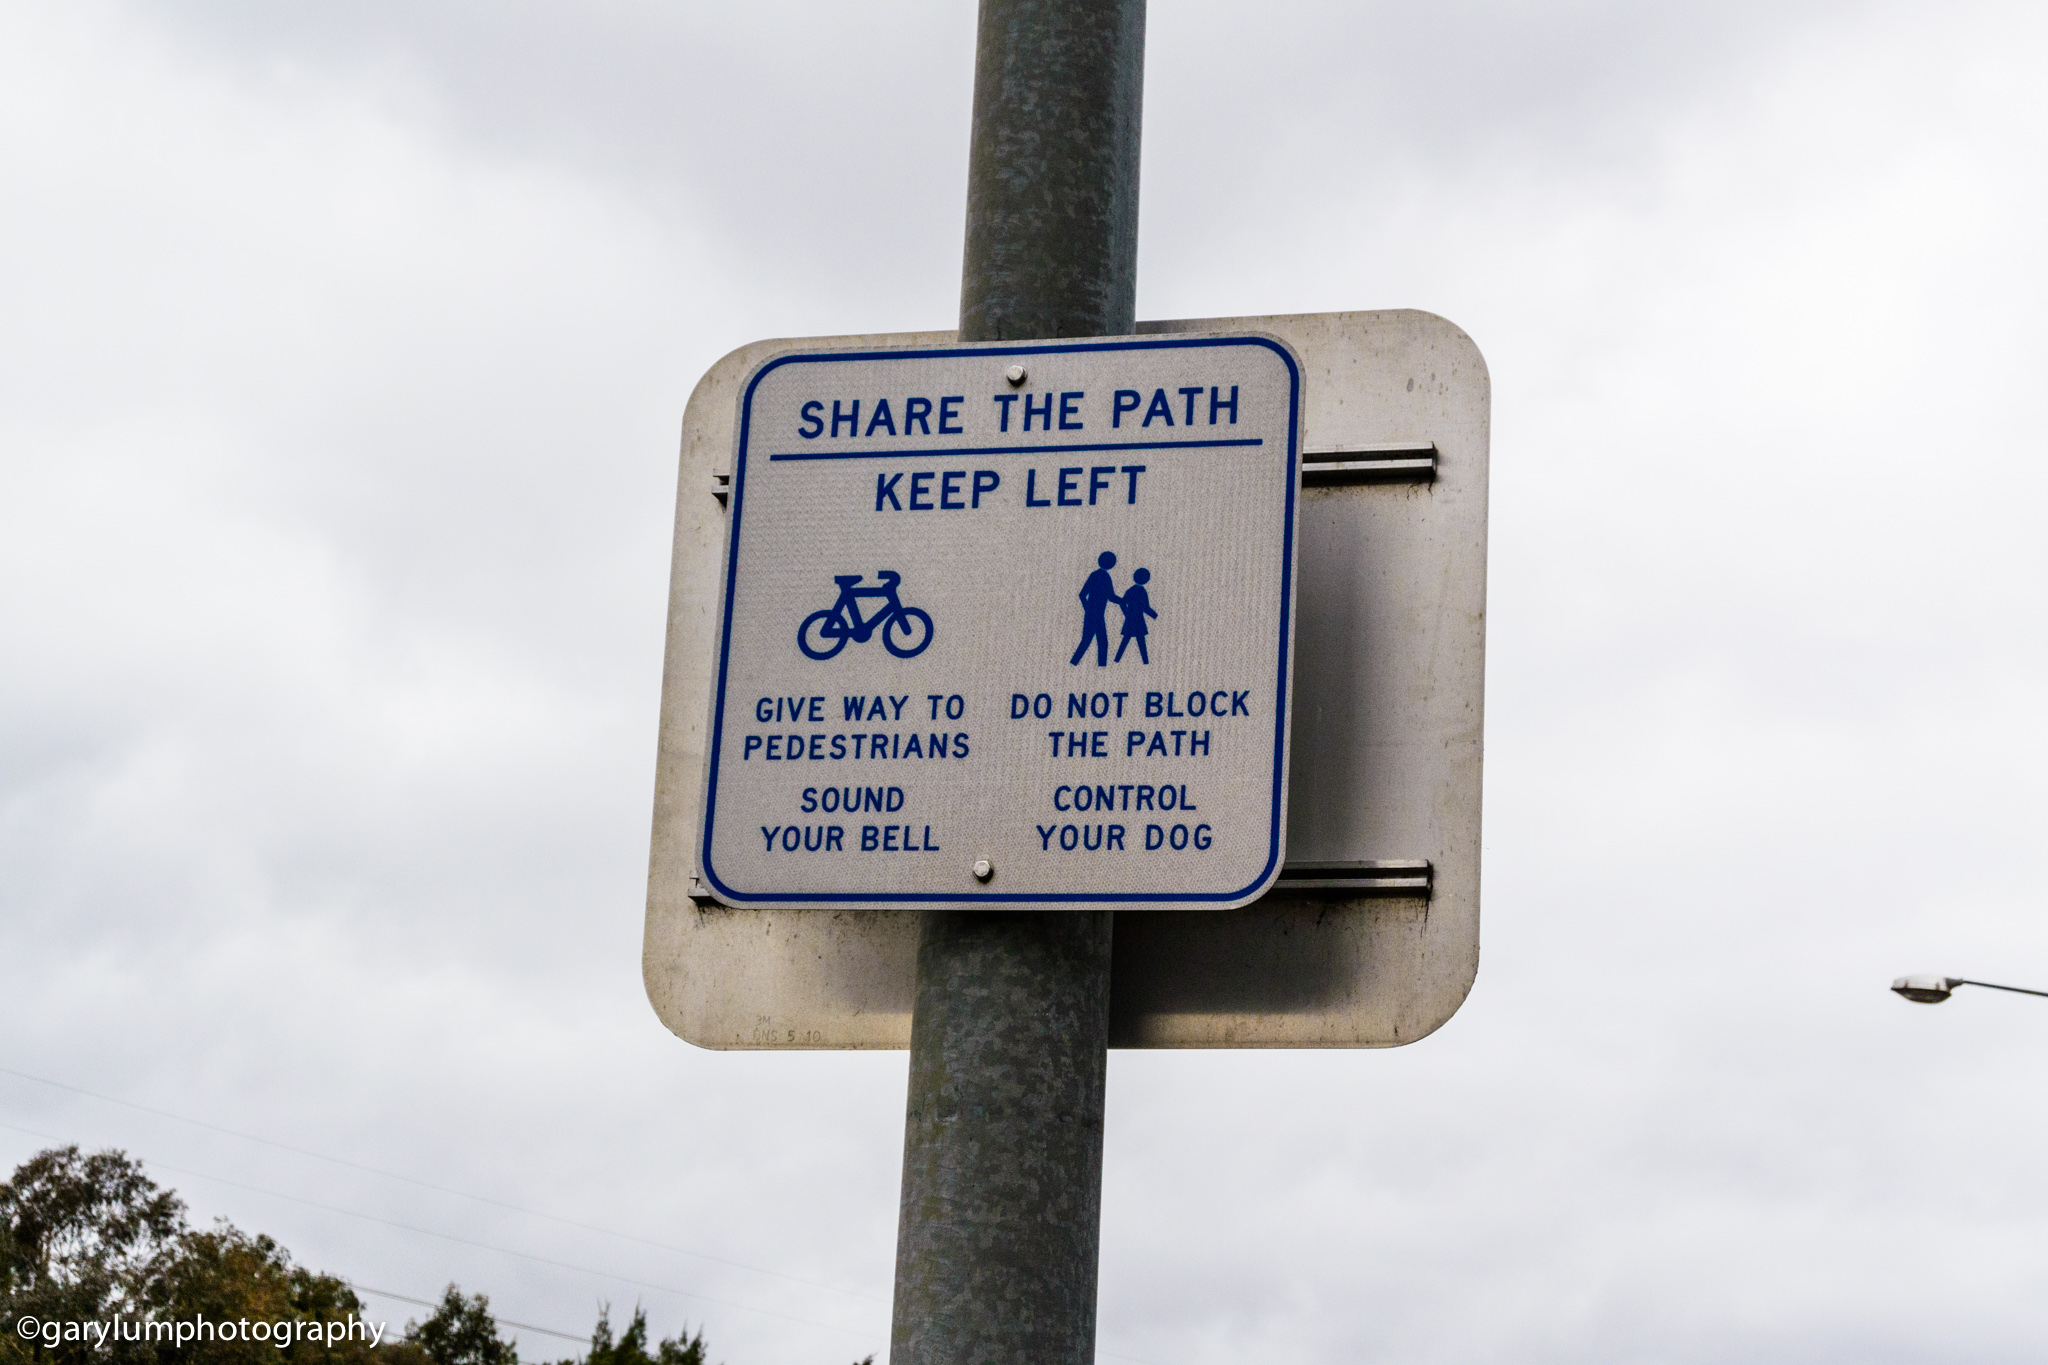 This is important when I walk or cycle